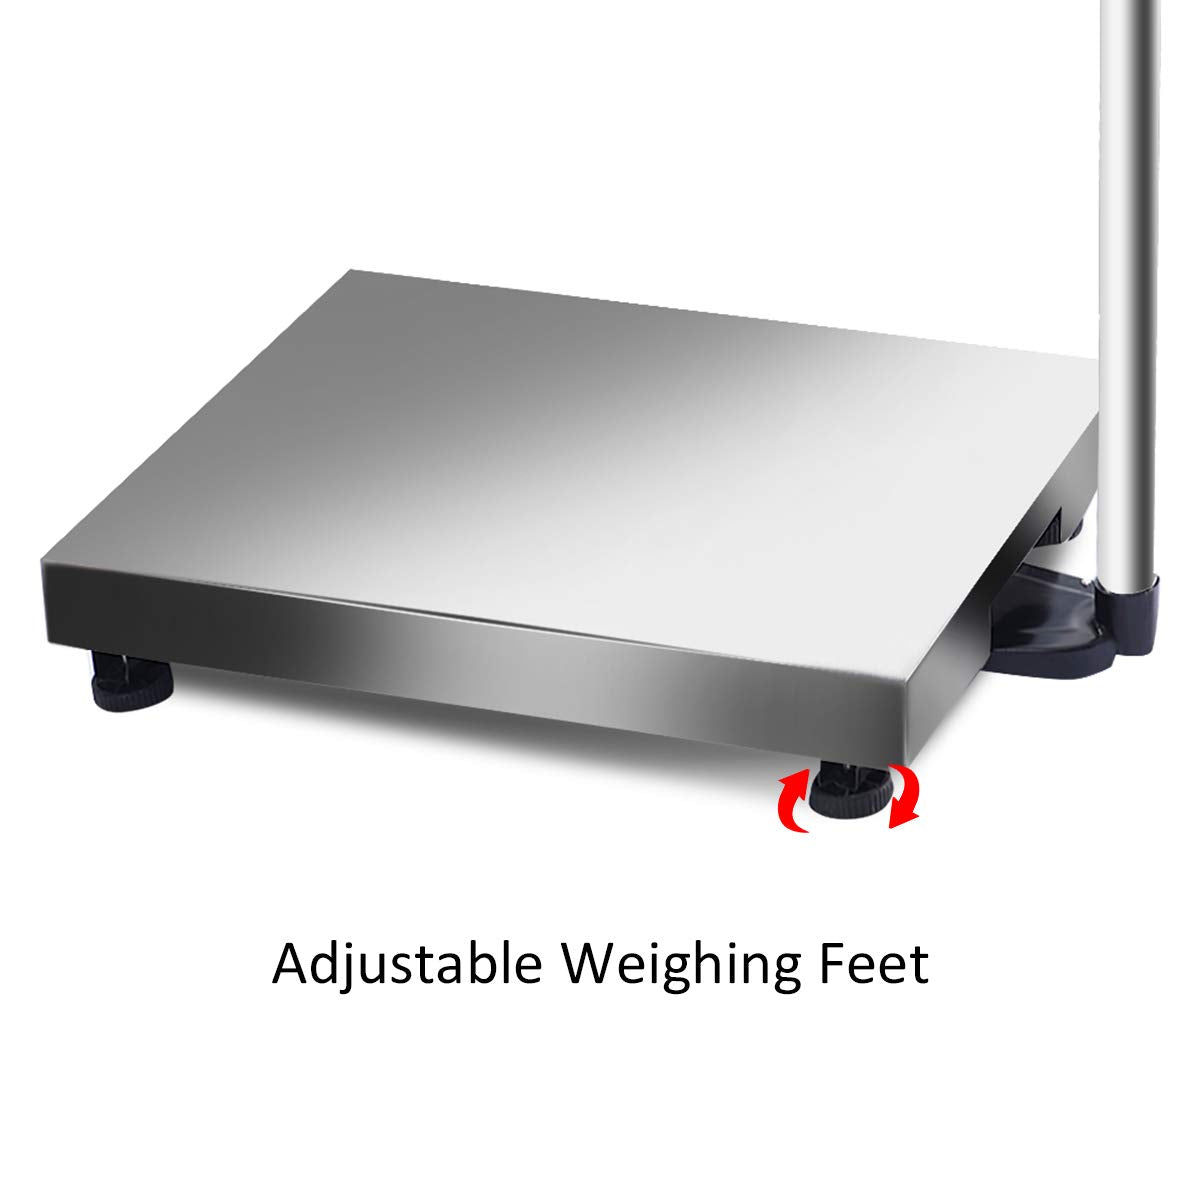 XtremepowerUS 600 lbs. Heavy Duty Foldable Weight Computing